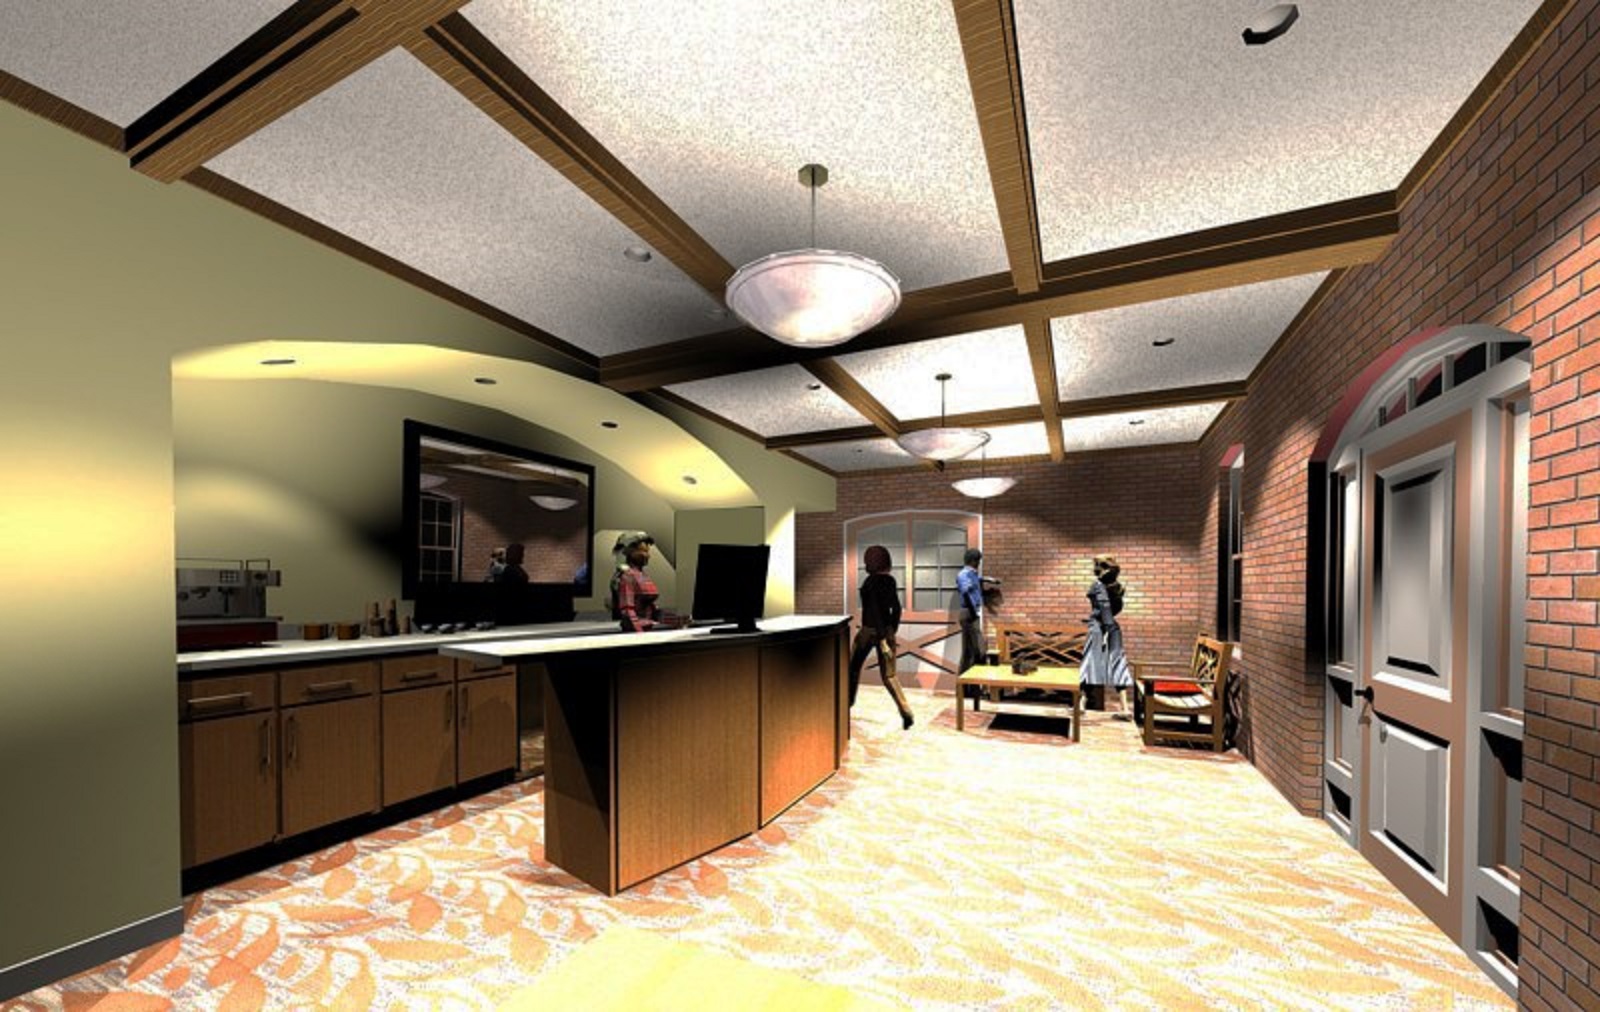 1026 190301 Proposed Lobby Rendering cropped